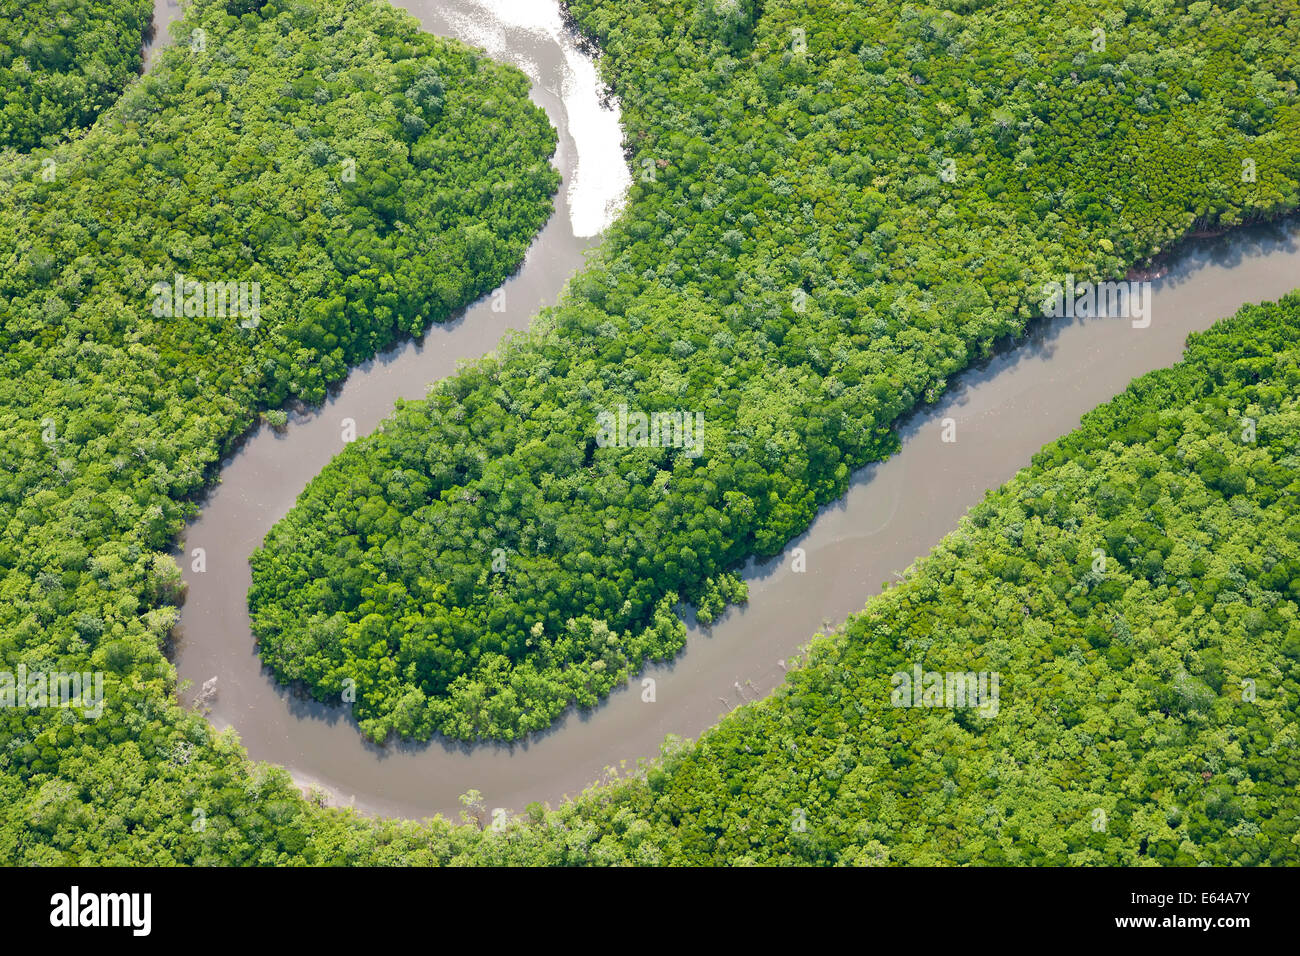 Aerial view of rain forest, Daintree River, Daintree National Park, Queensland Australia Stock Photo